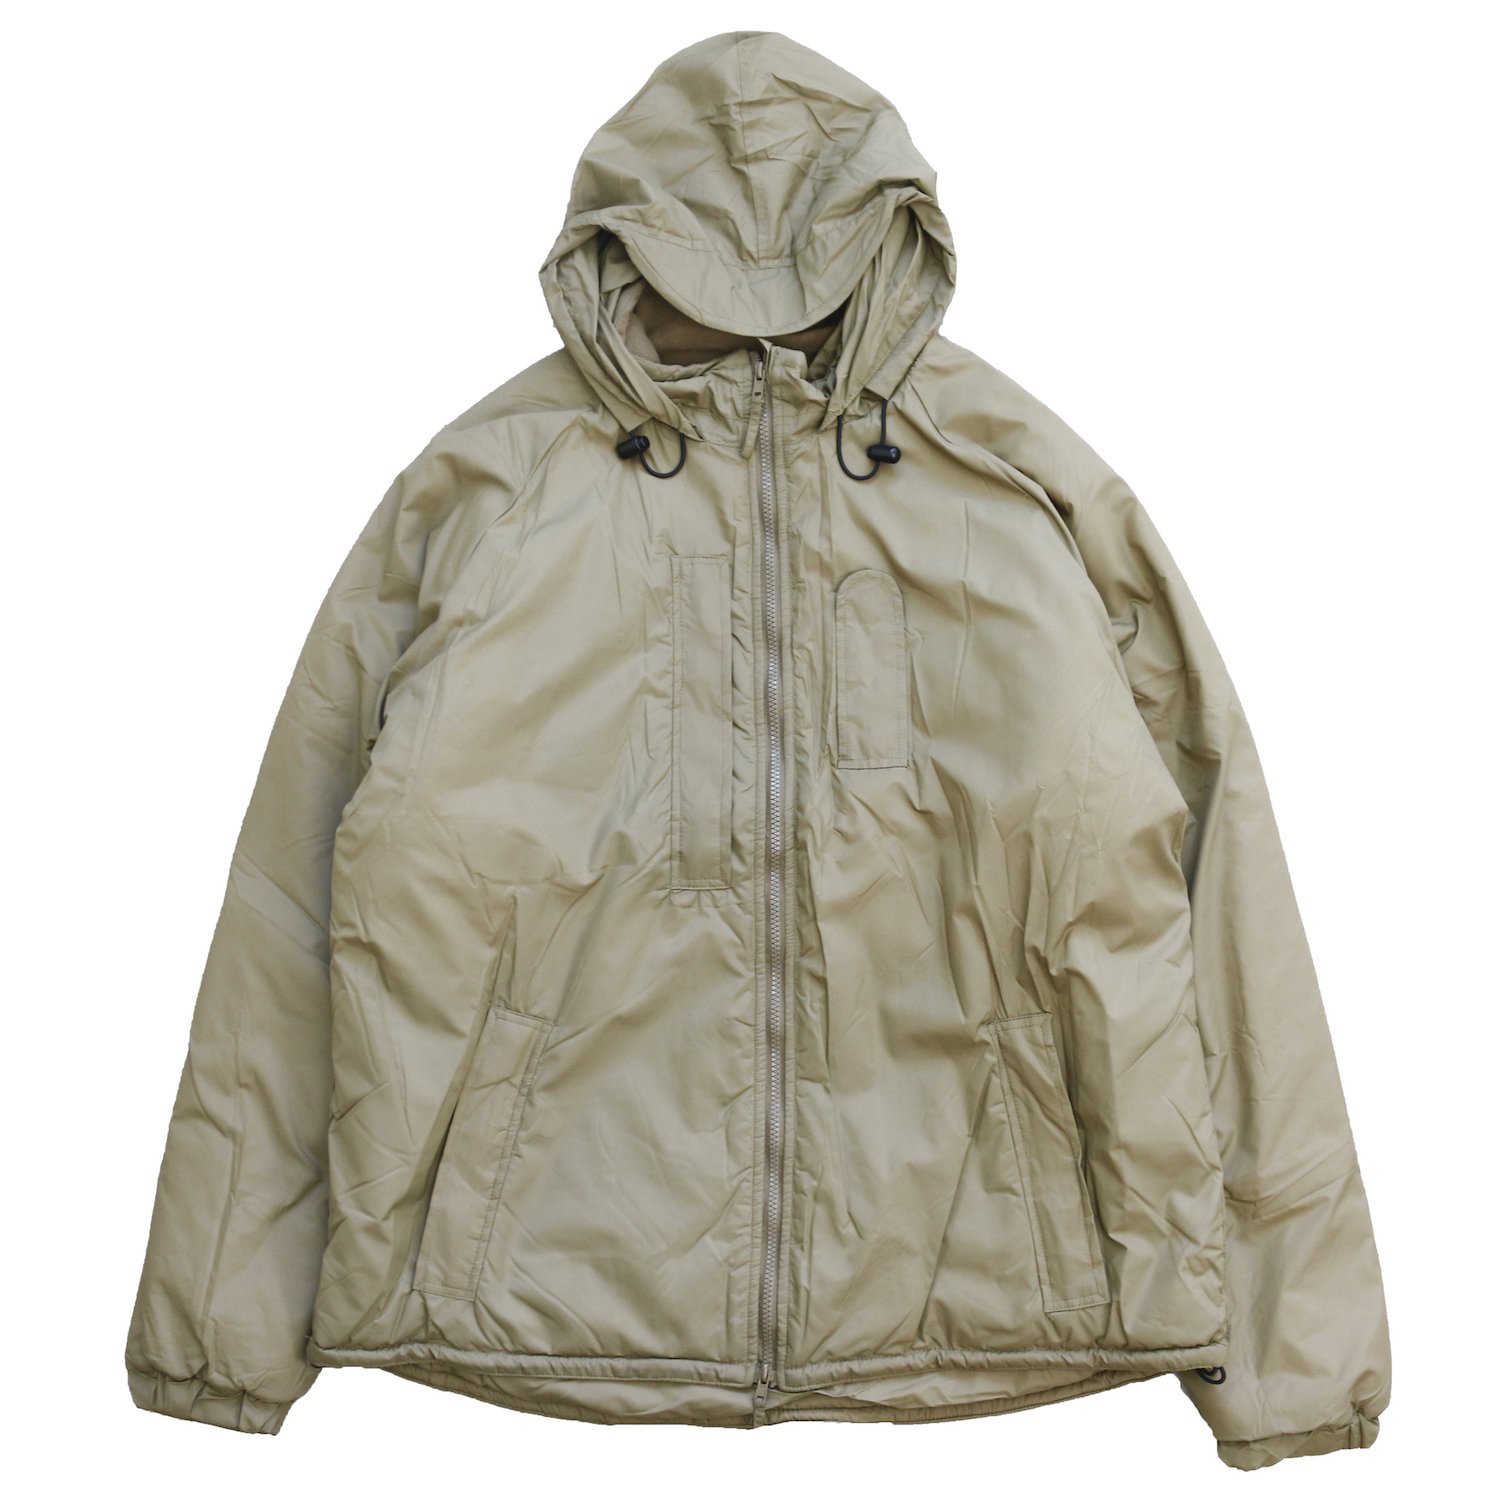 <img class='new_mark_img1' src='https://img.shop-pro.jp/img/new/icons8.gif' style='border:none;display:inline;margin:0px;padding:0px;width:auto;' />MILITARY / BRITISH ARMY DEADSTOCK JACKET THERMAL With Integral Stuff Bag PCU 